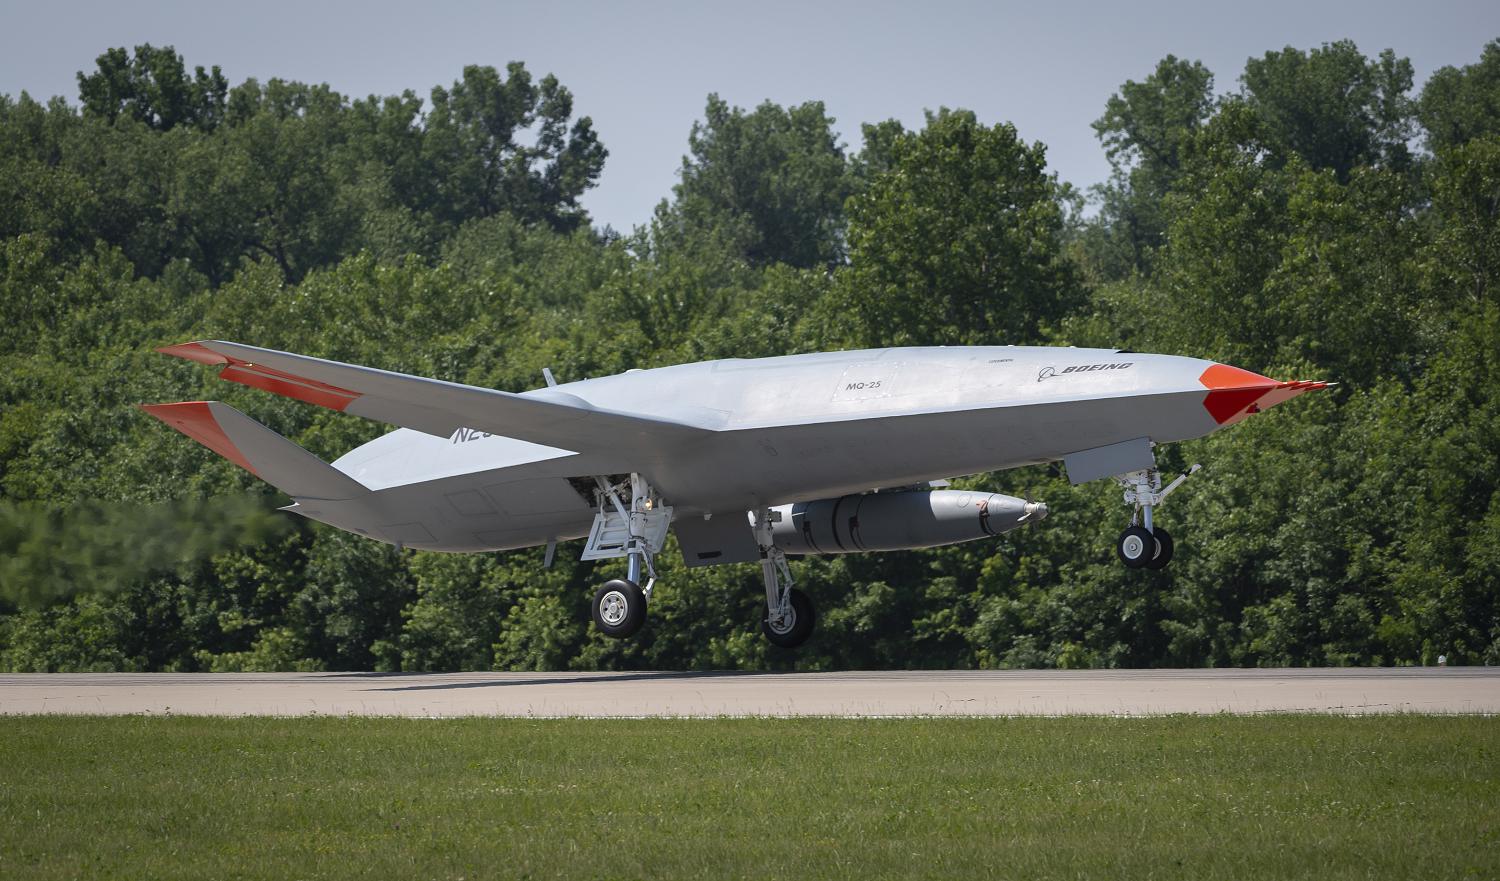 MASCOUTAH, Ill. (June 4, 2021) An unmanned Boeing MQ-25 T1 Stingray test aircraft takes off from MidAmerica Airport in Mascoutah, Illinois to conduct an aerial refueling test with a manned F/A-18 Super Hornet, June 4, 2021. This successful flight demonstrated that the MQ-25 Stingray can fulfill its tanker mission using the Navy's standard probe-and-drogue aerial refueling method. Testing with the unmanned MQ-25 T1 Stingray will continue over the next several months. The MQ-25A Stingray will be the world's first operational carrier-based unmanned aircraft and provide critical aerial refueling and intelligence, surveillance and reconnaissance capabilities that greatly expand the global reach, operational flexibility and lethality of the carrier air wing and carrier strike group. (U.S. Navy photo courtesy of Boeing)